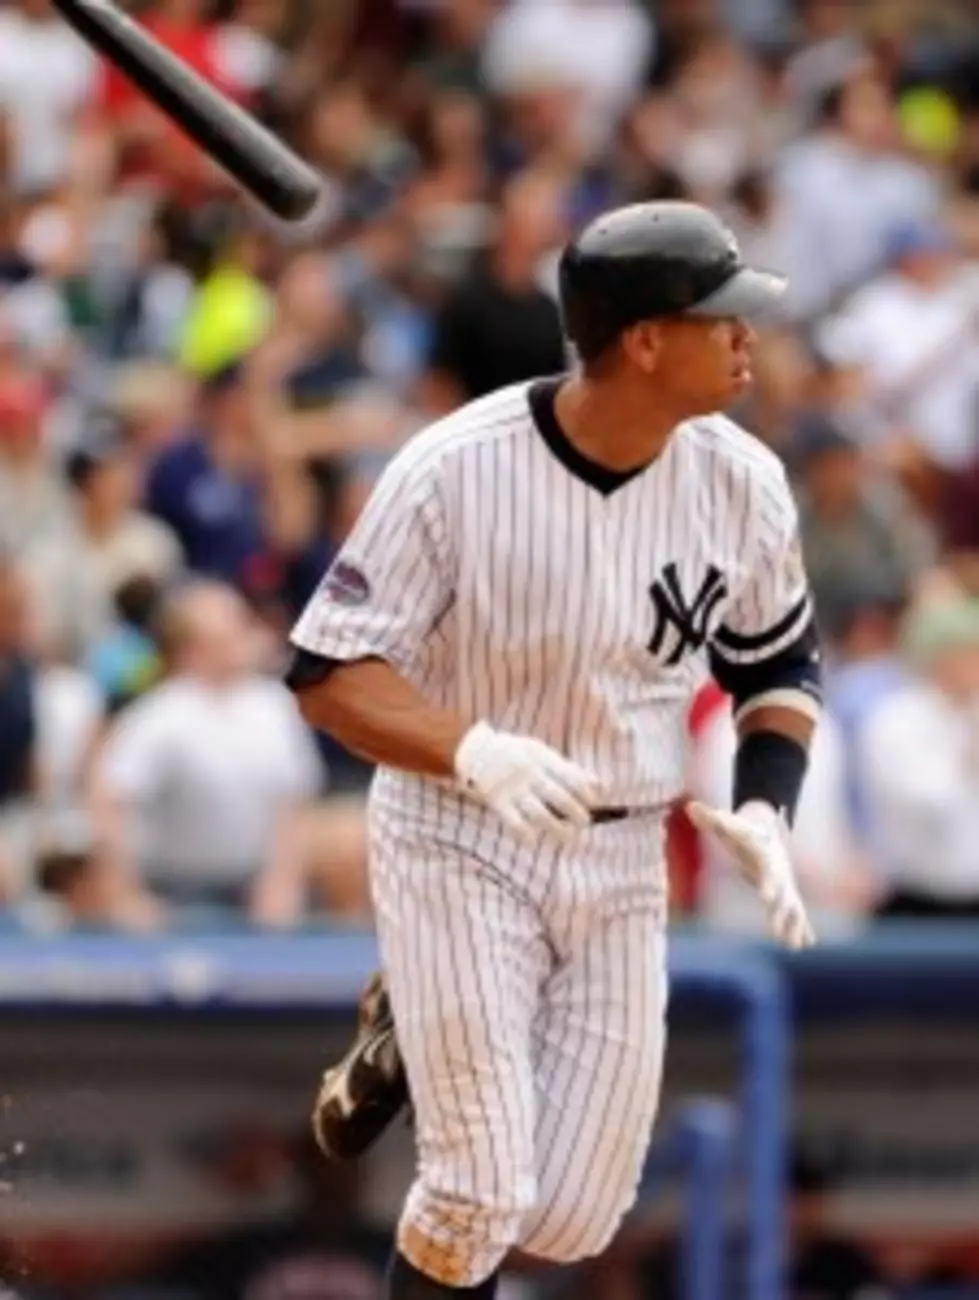 A-Rod Passes Mays On Home Run List